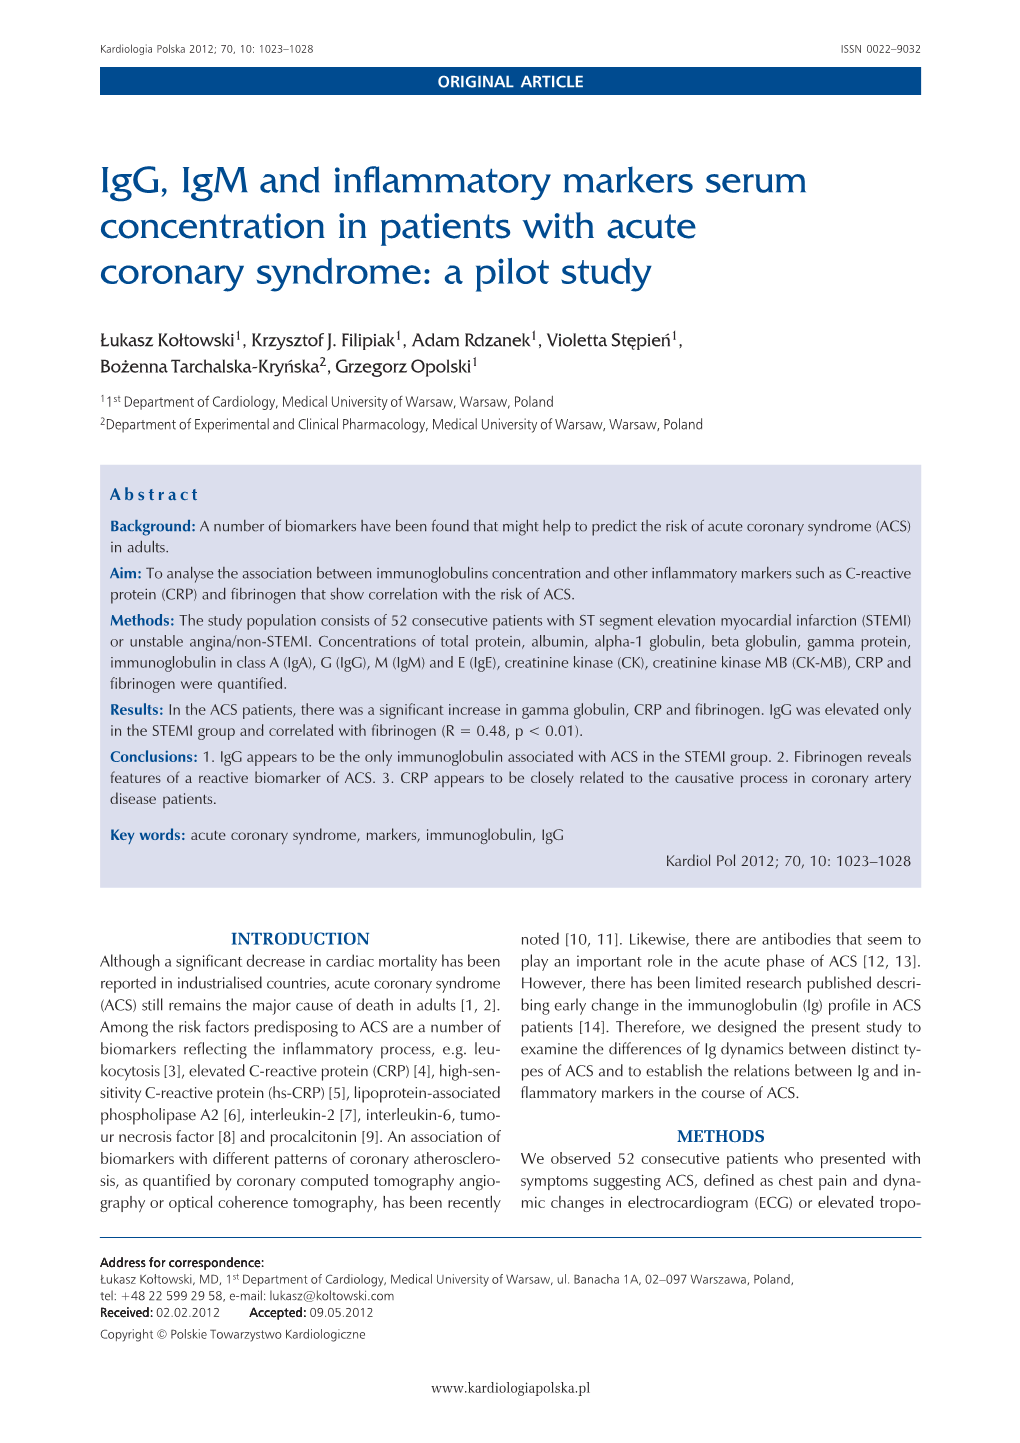 Igg, Igm and Inflammatory Markers Serum Concentration in Patients with Acute Coronary Syndrome: a Pilot Study